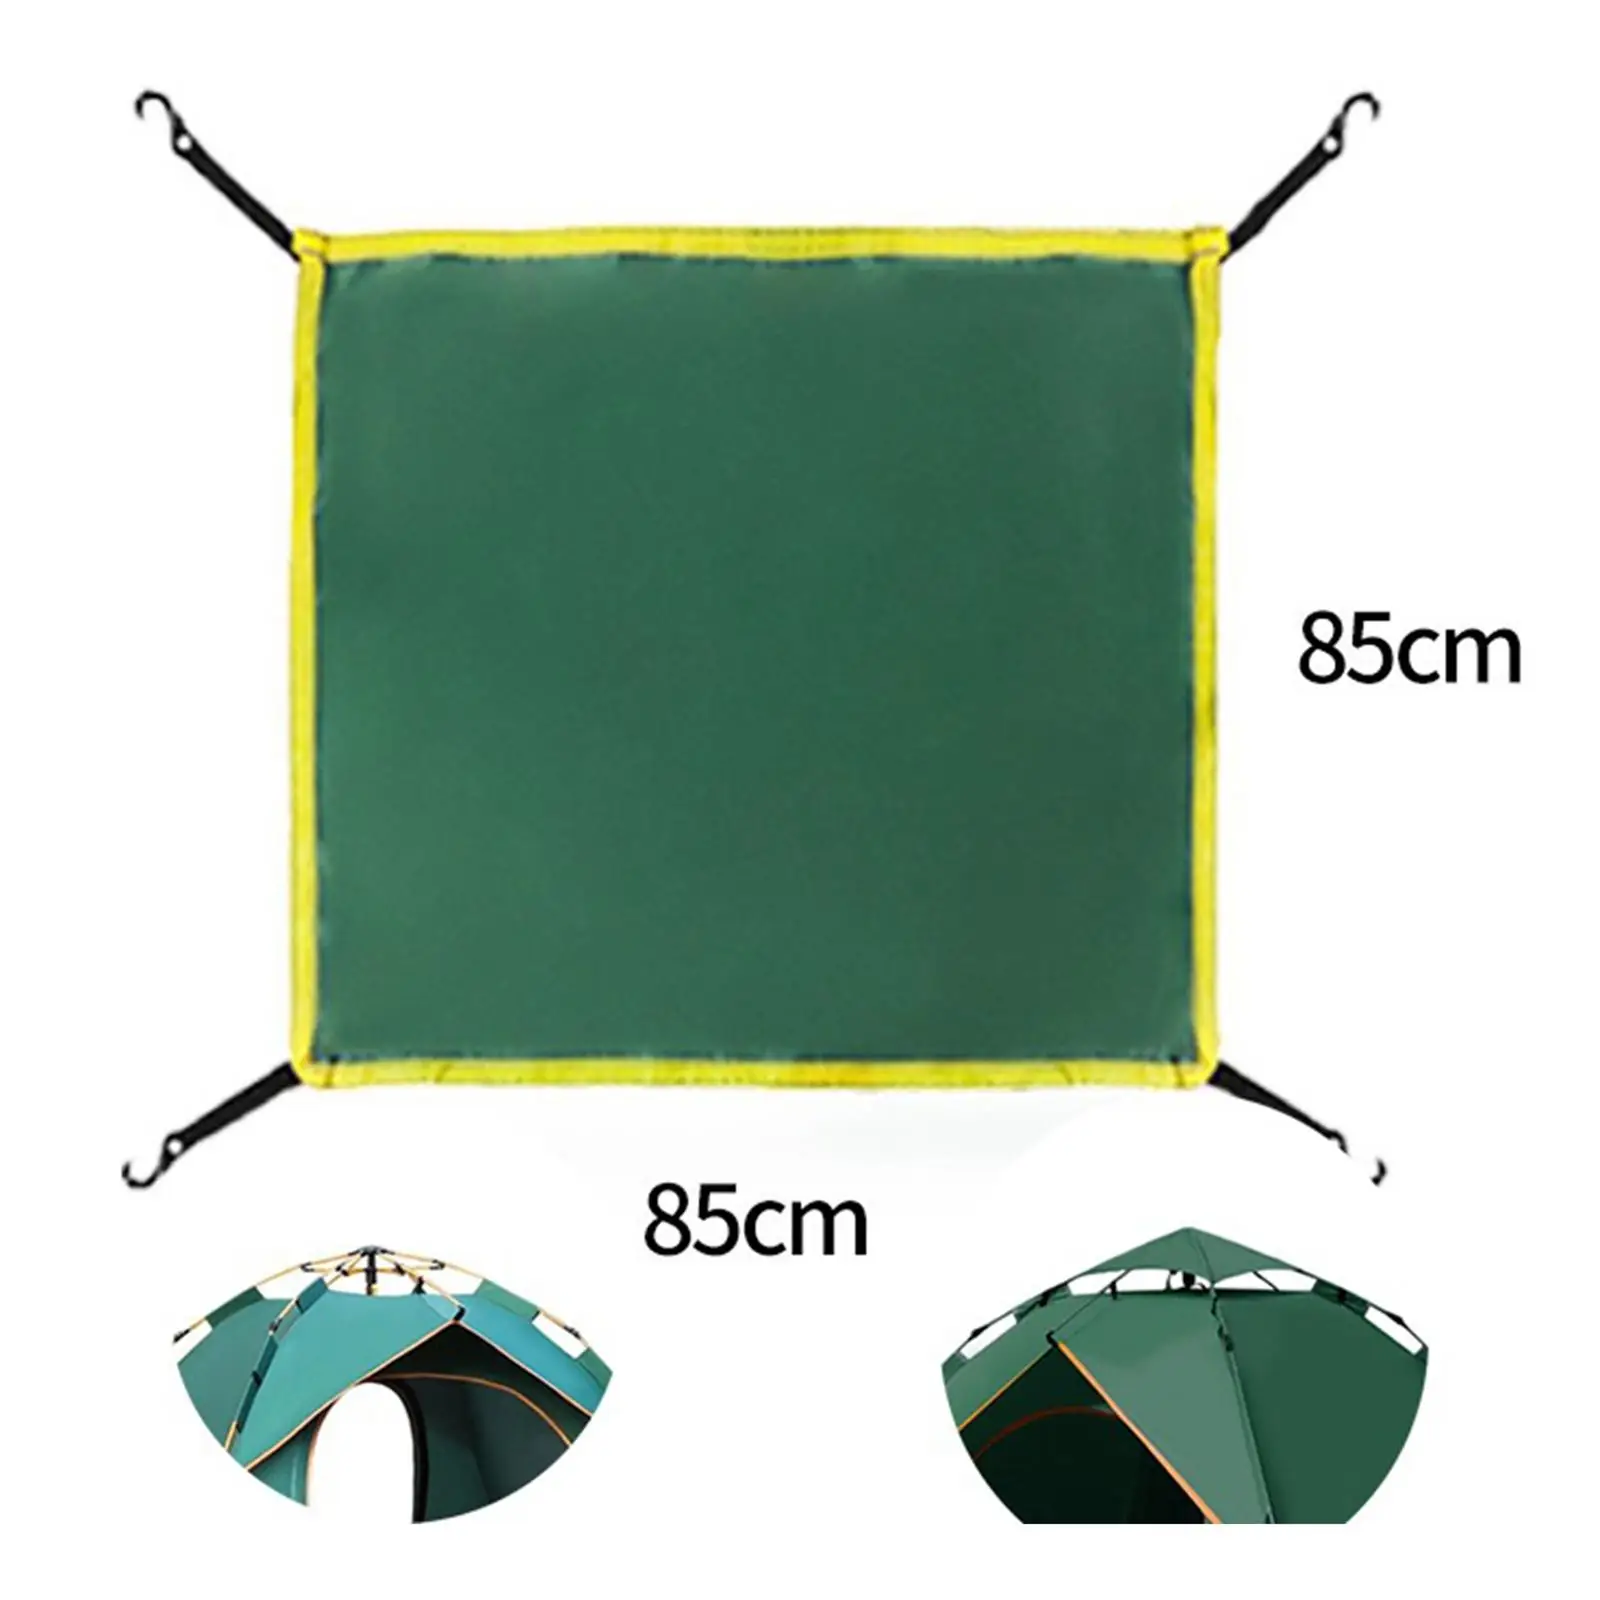 Tent Top Cover Top Cloth Waterproof Sun Protection Foldable Dome Tent Cover for Holiday Outdoor Fishing Travel Backpacking